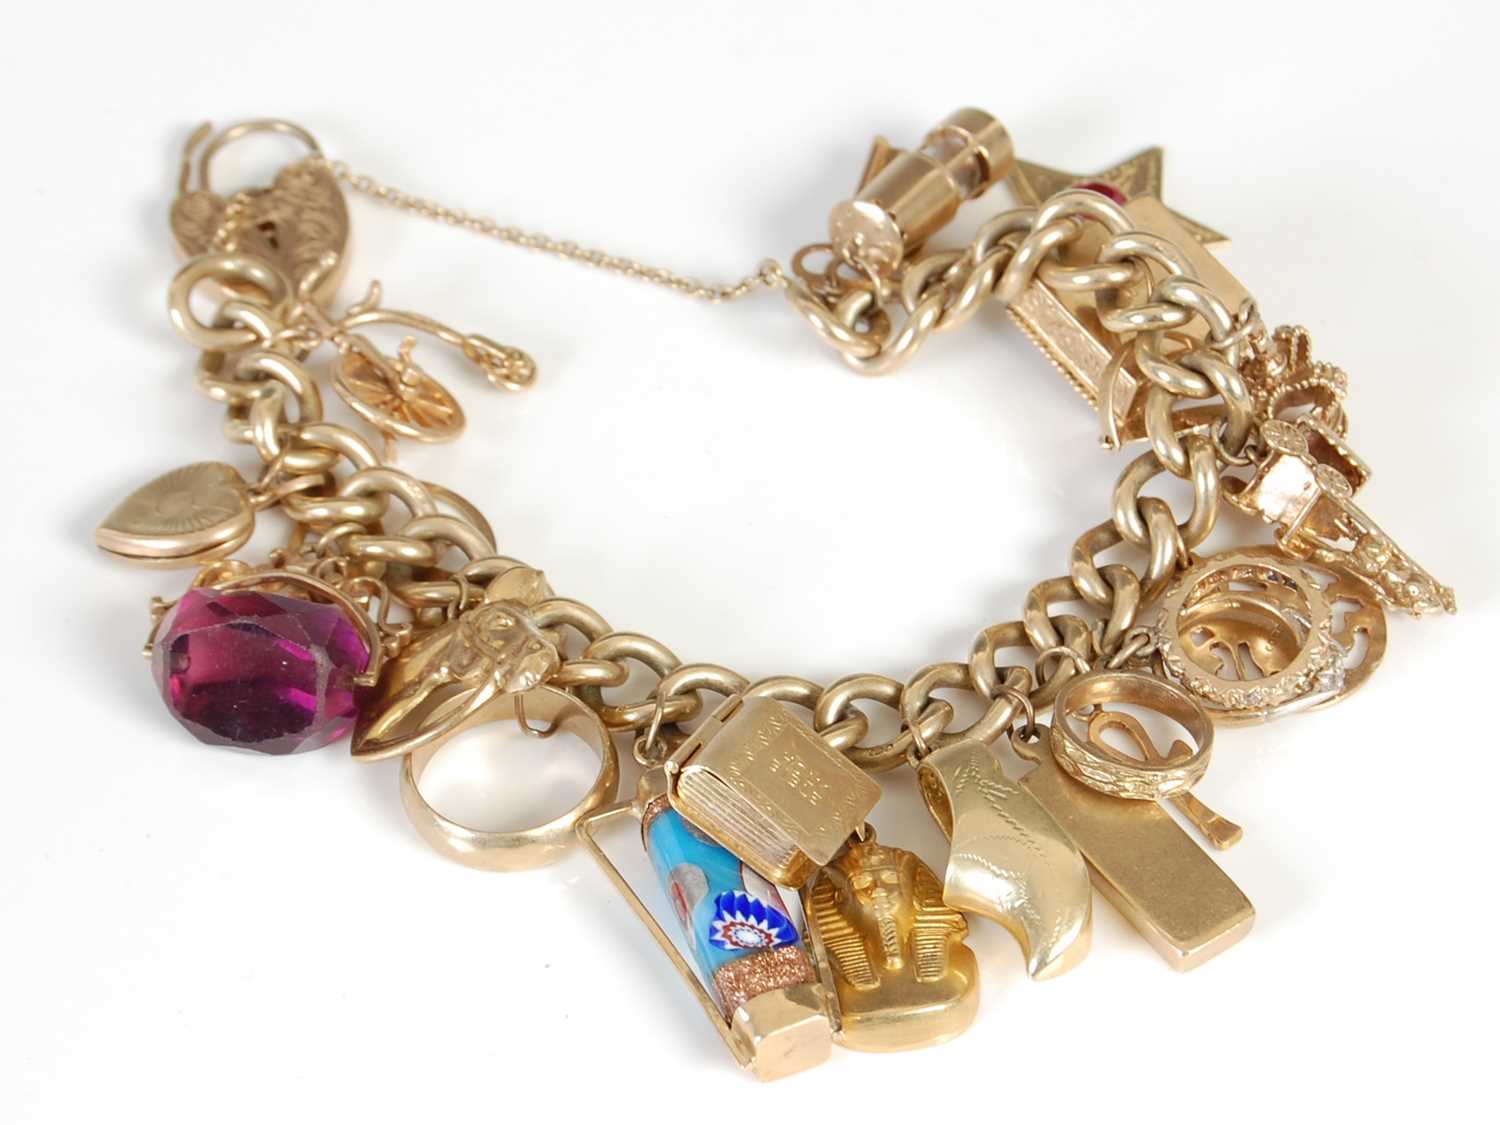 Gerry Browne Gold Gold Charm Bracelet  Jewellery from Gerry Browne  Jewellers UK